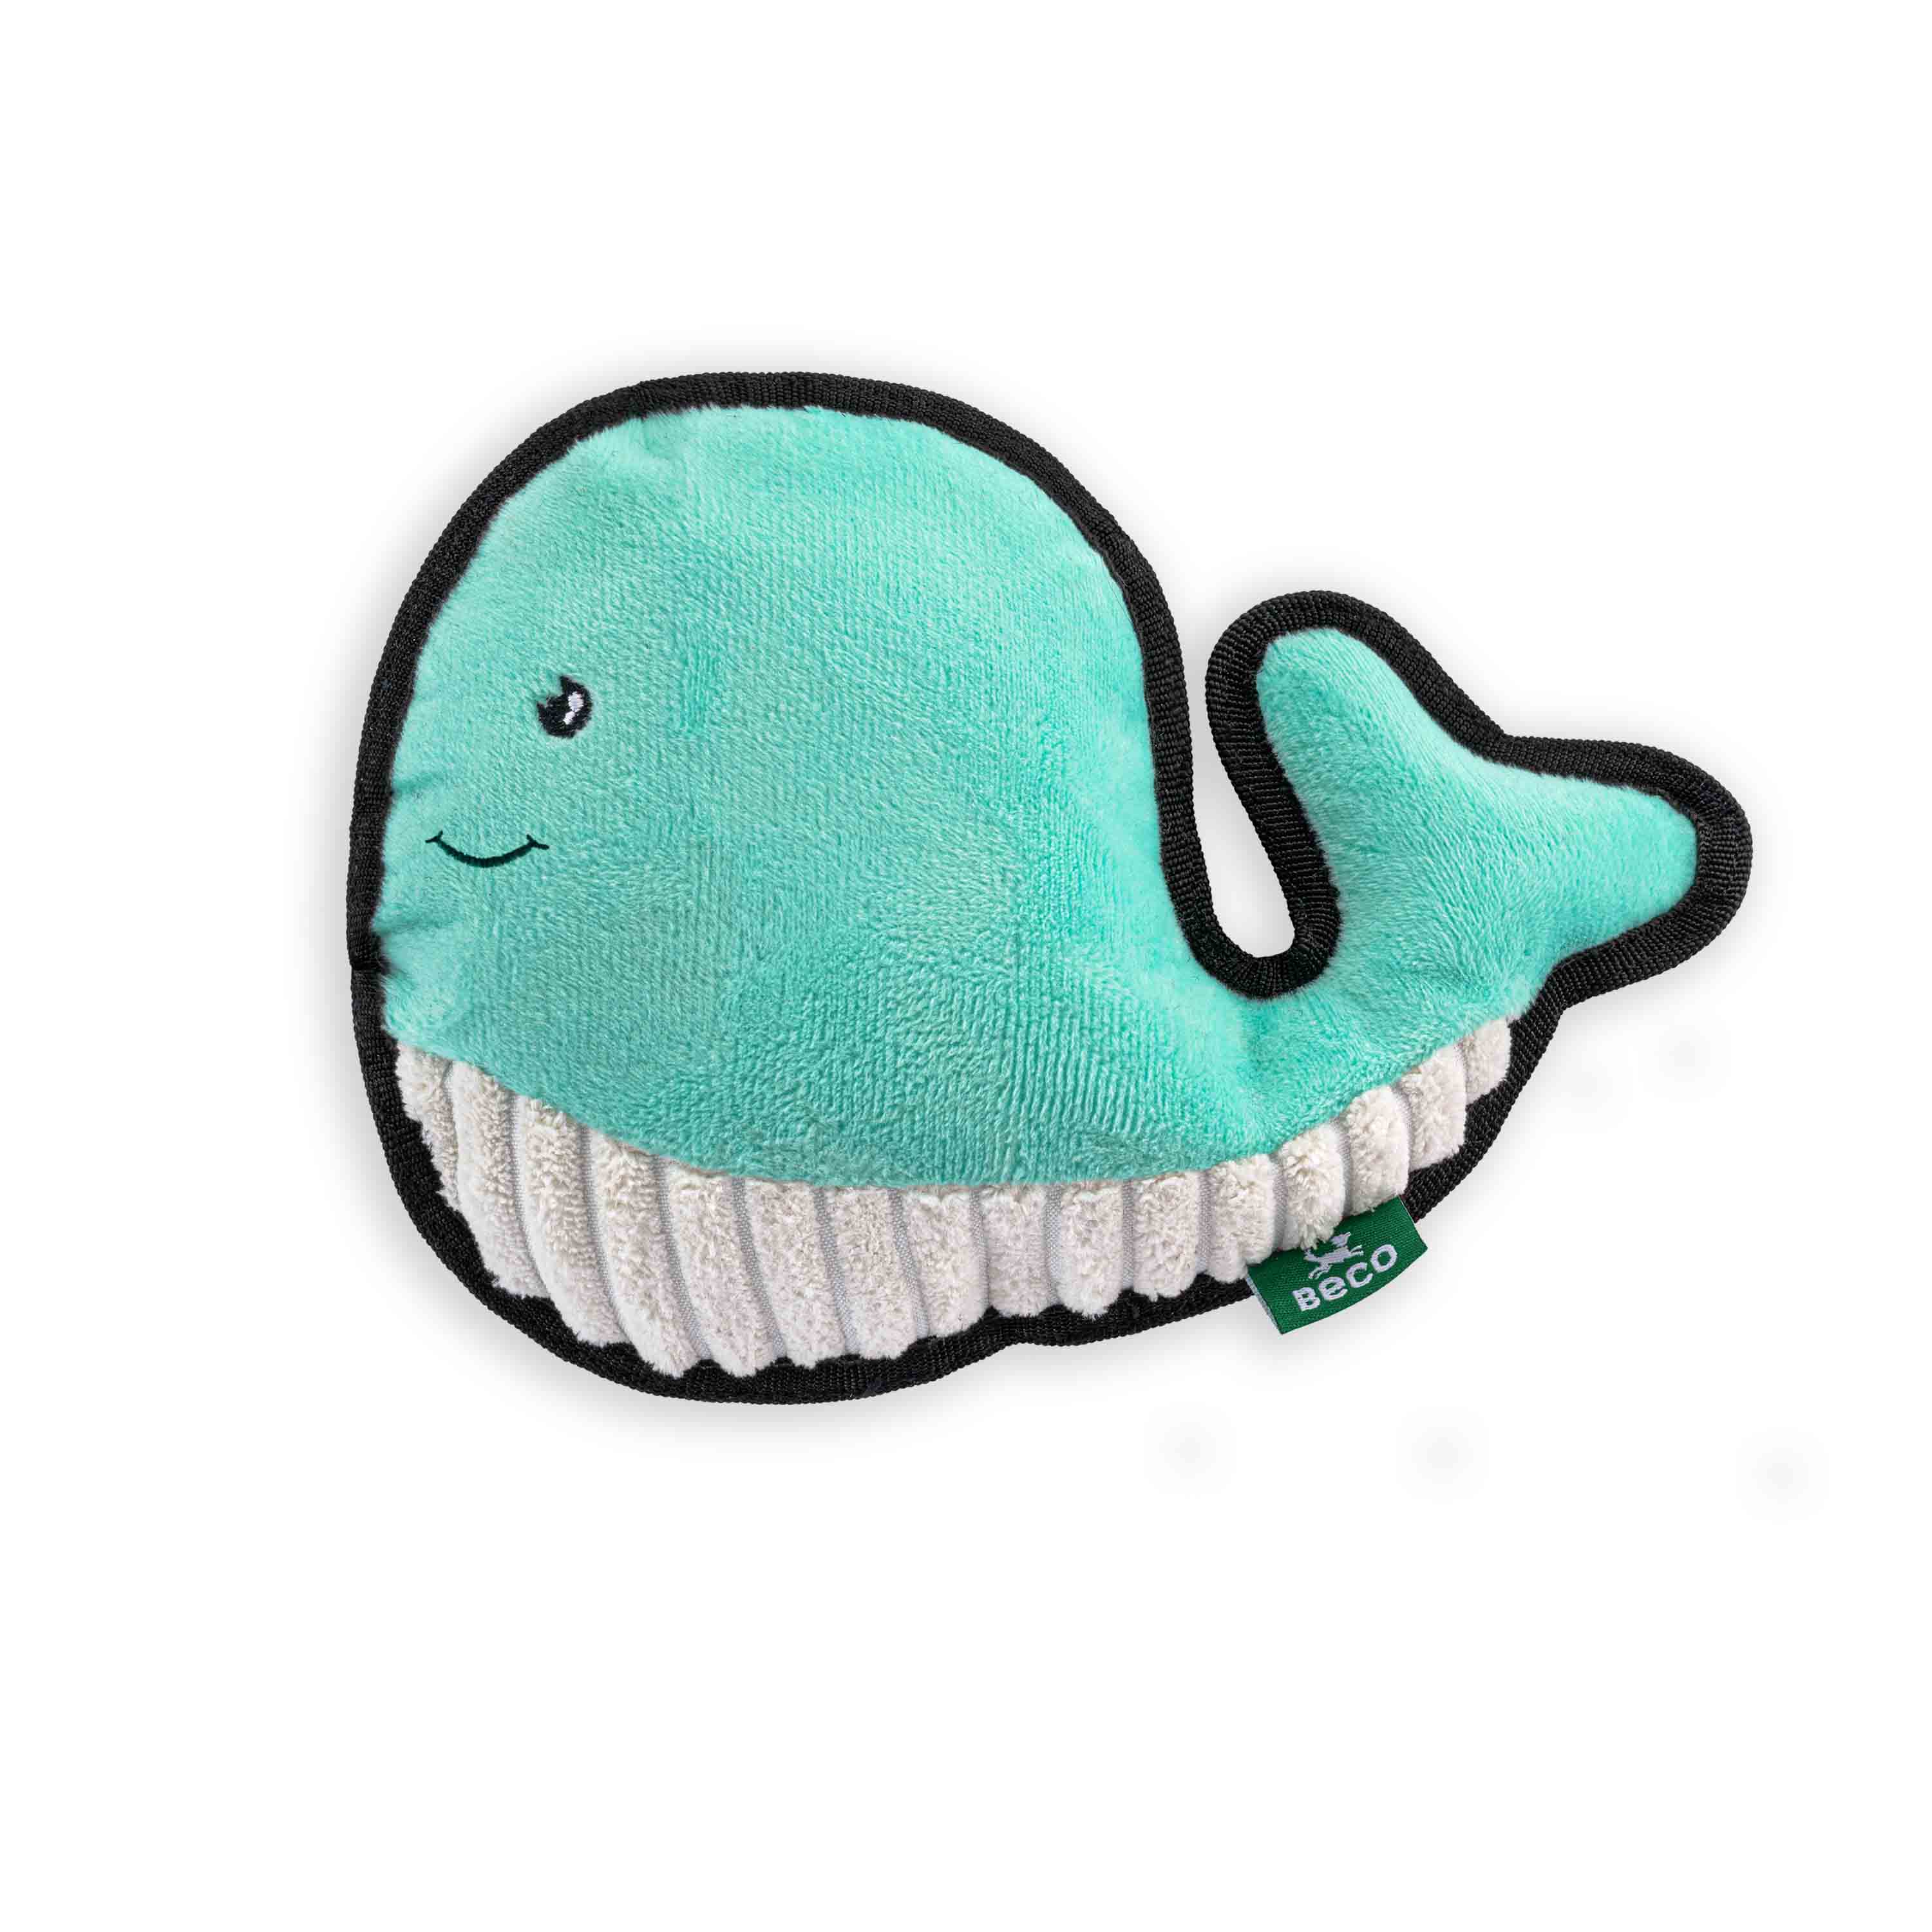 Rough & Tough Recycled Plastic Whale Dog Toy (7868565946610)